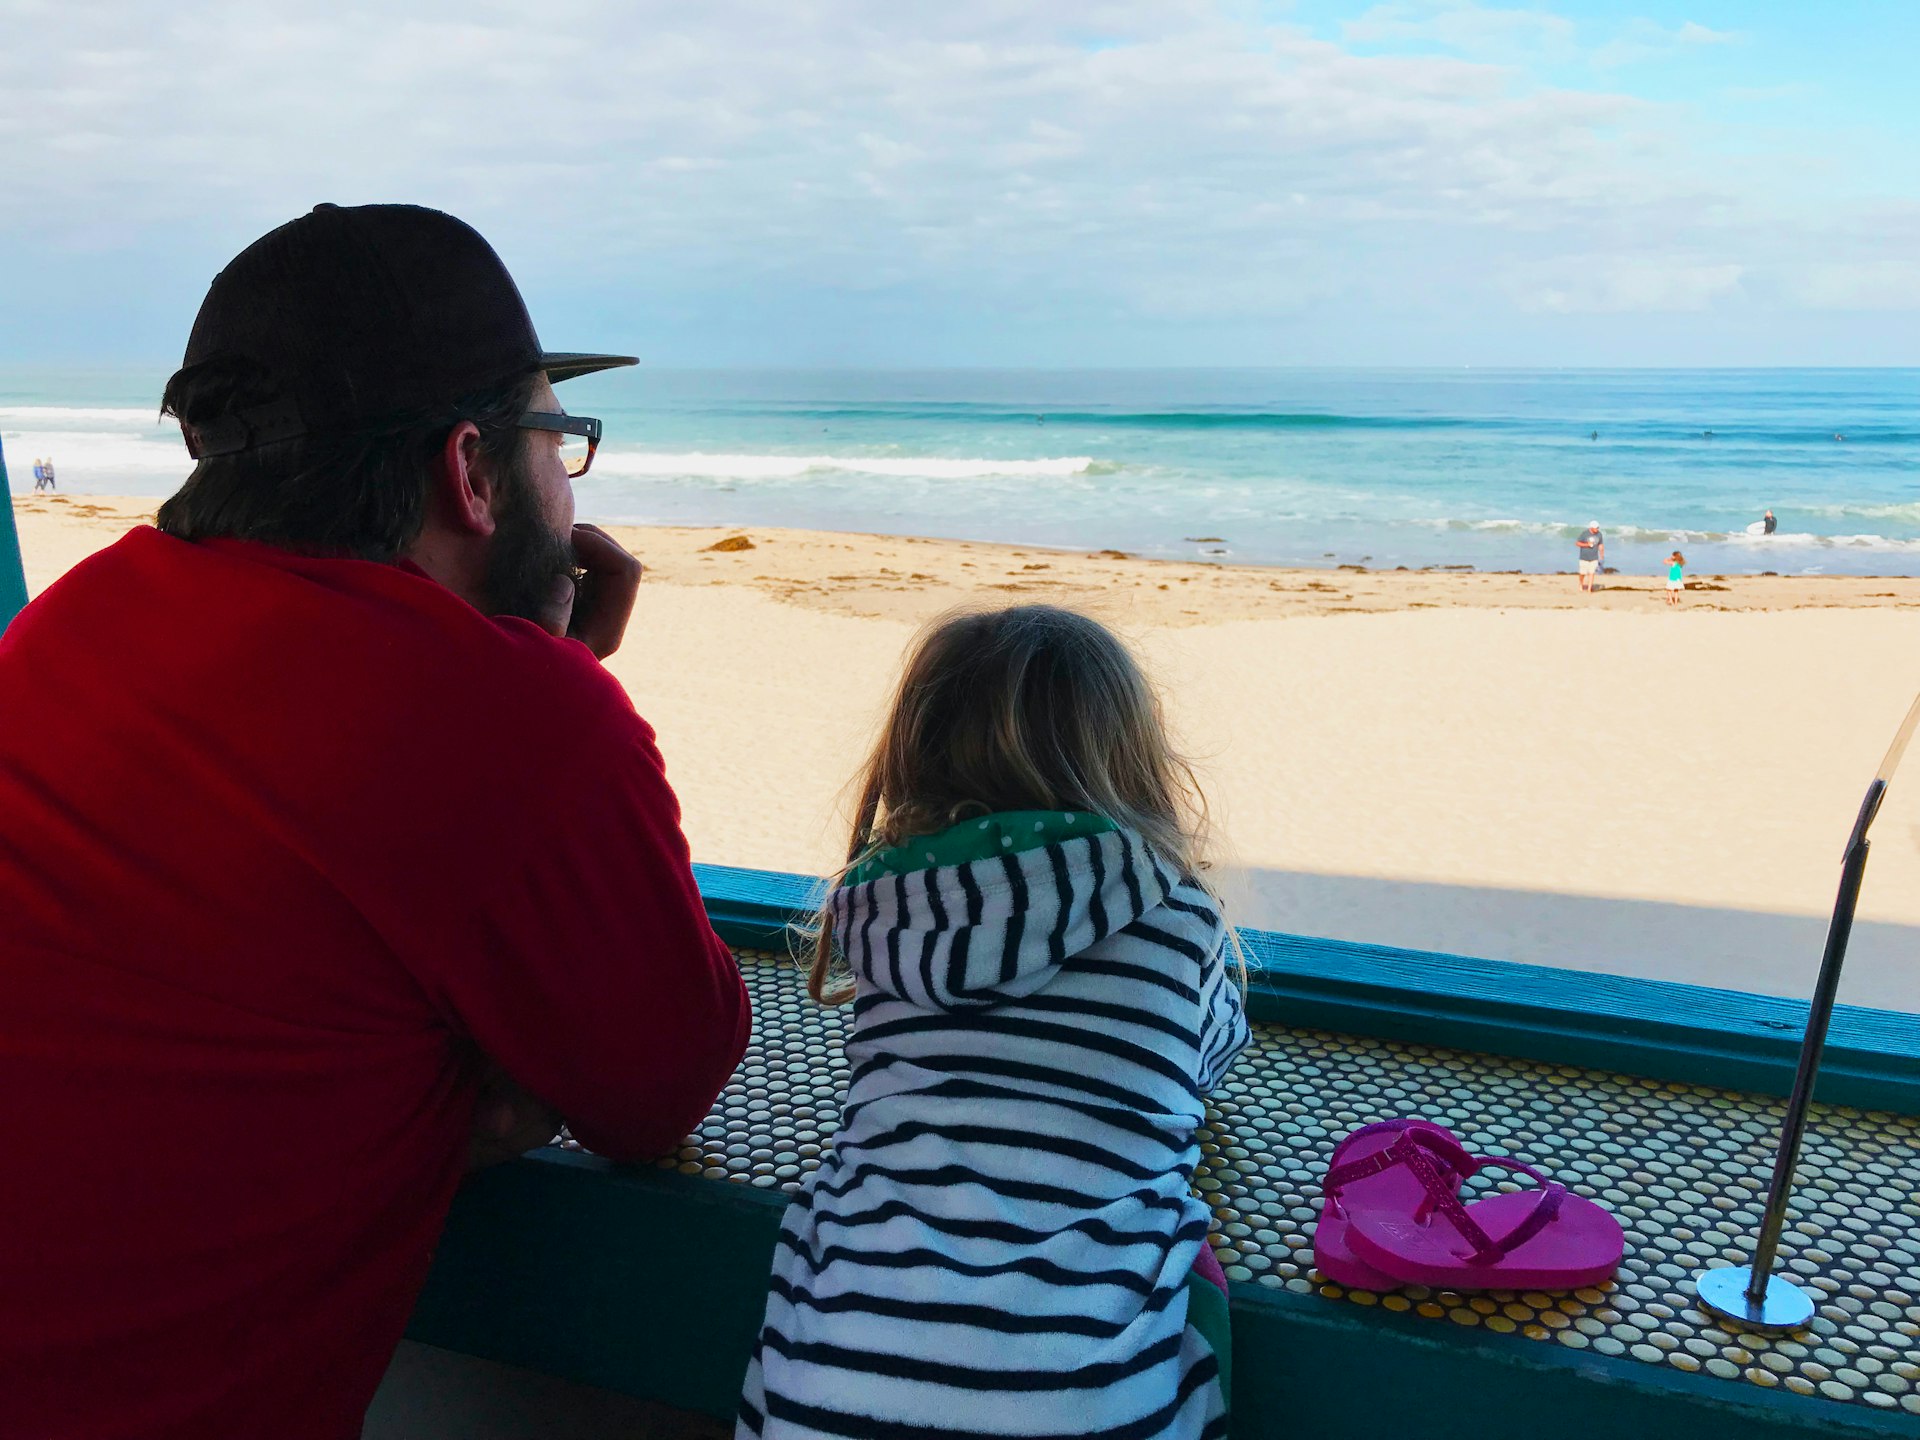 A man and his daughter watch surfers on the beach while waiting for food © Sarah Stocking / Lonely Planet